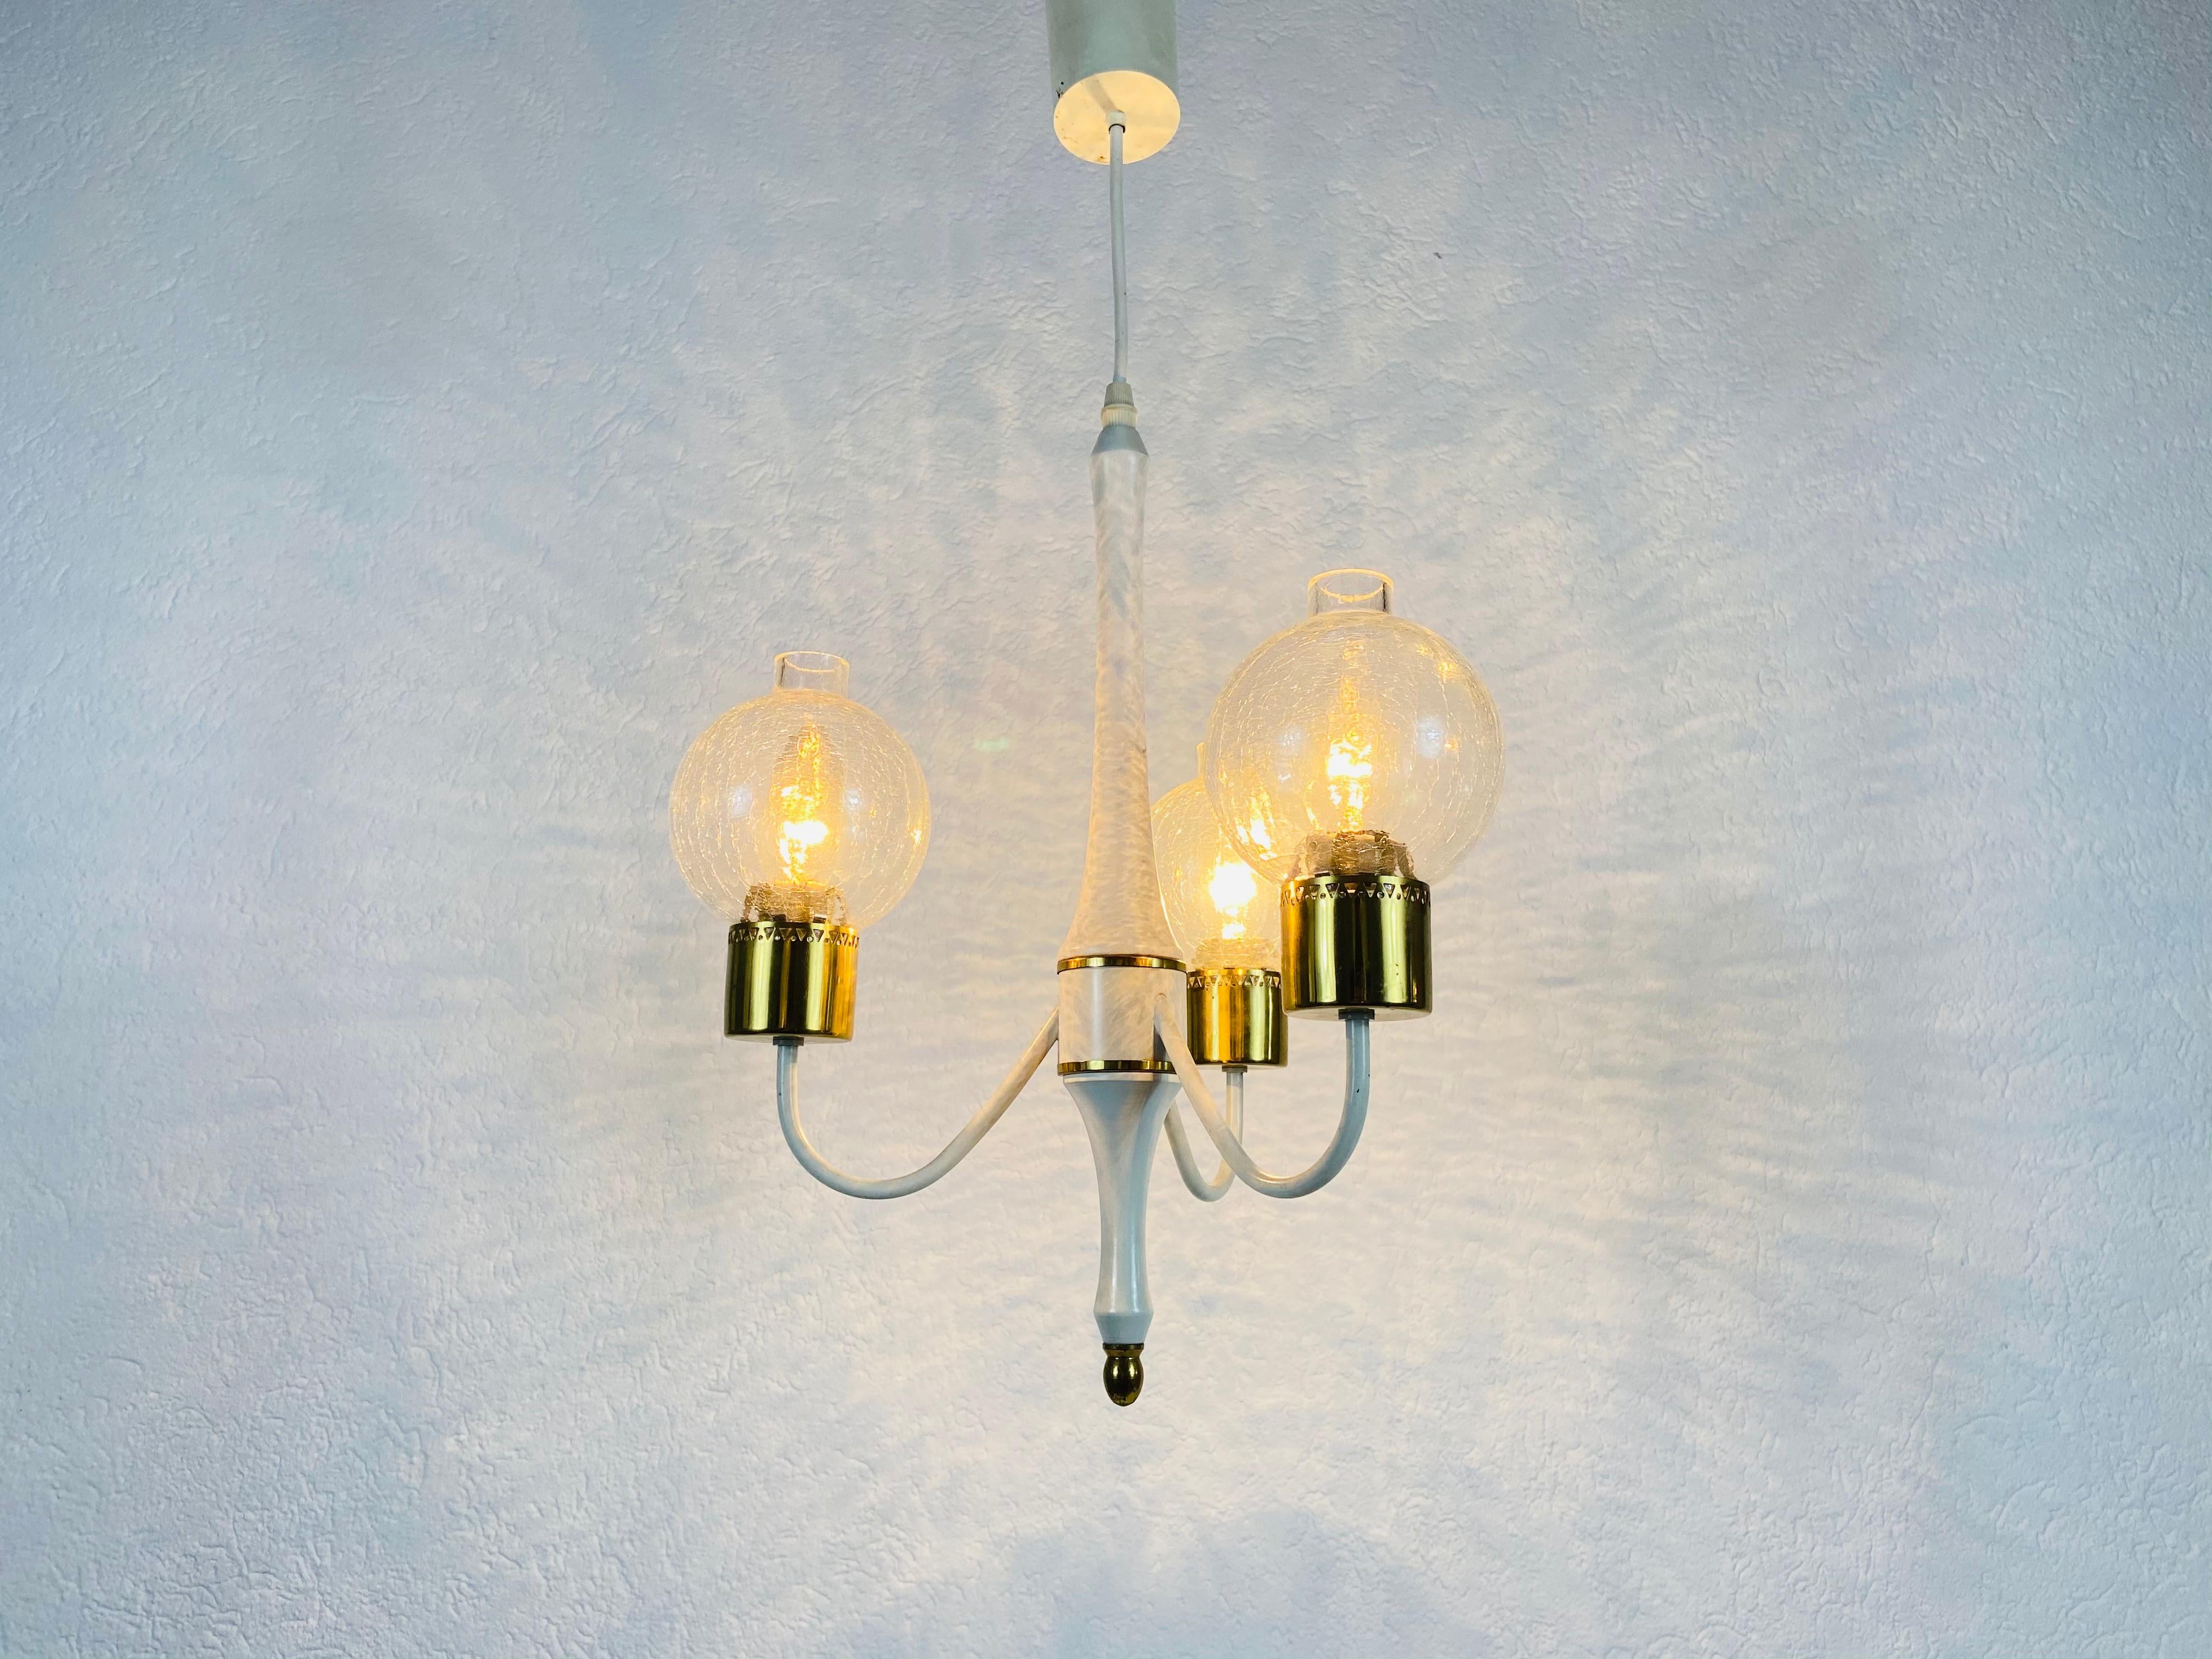 A midcentury chandelier made in Germany in the 1960s. It is fascinating with its rare arms and elegant design.

The light requires three E14 light bulbs. Works with both 120/220V. Good vintage condition.

Free worldwide express.